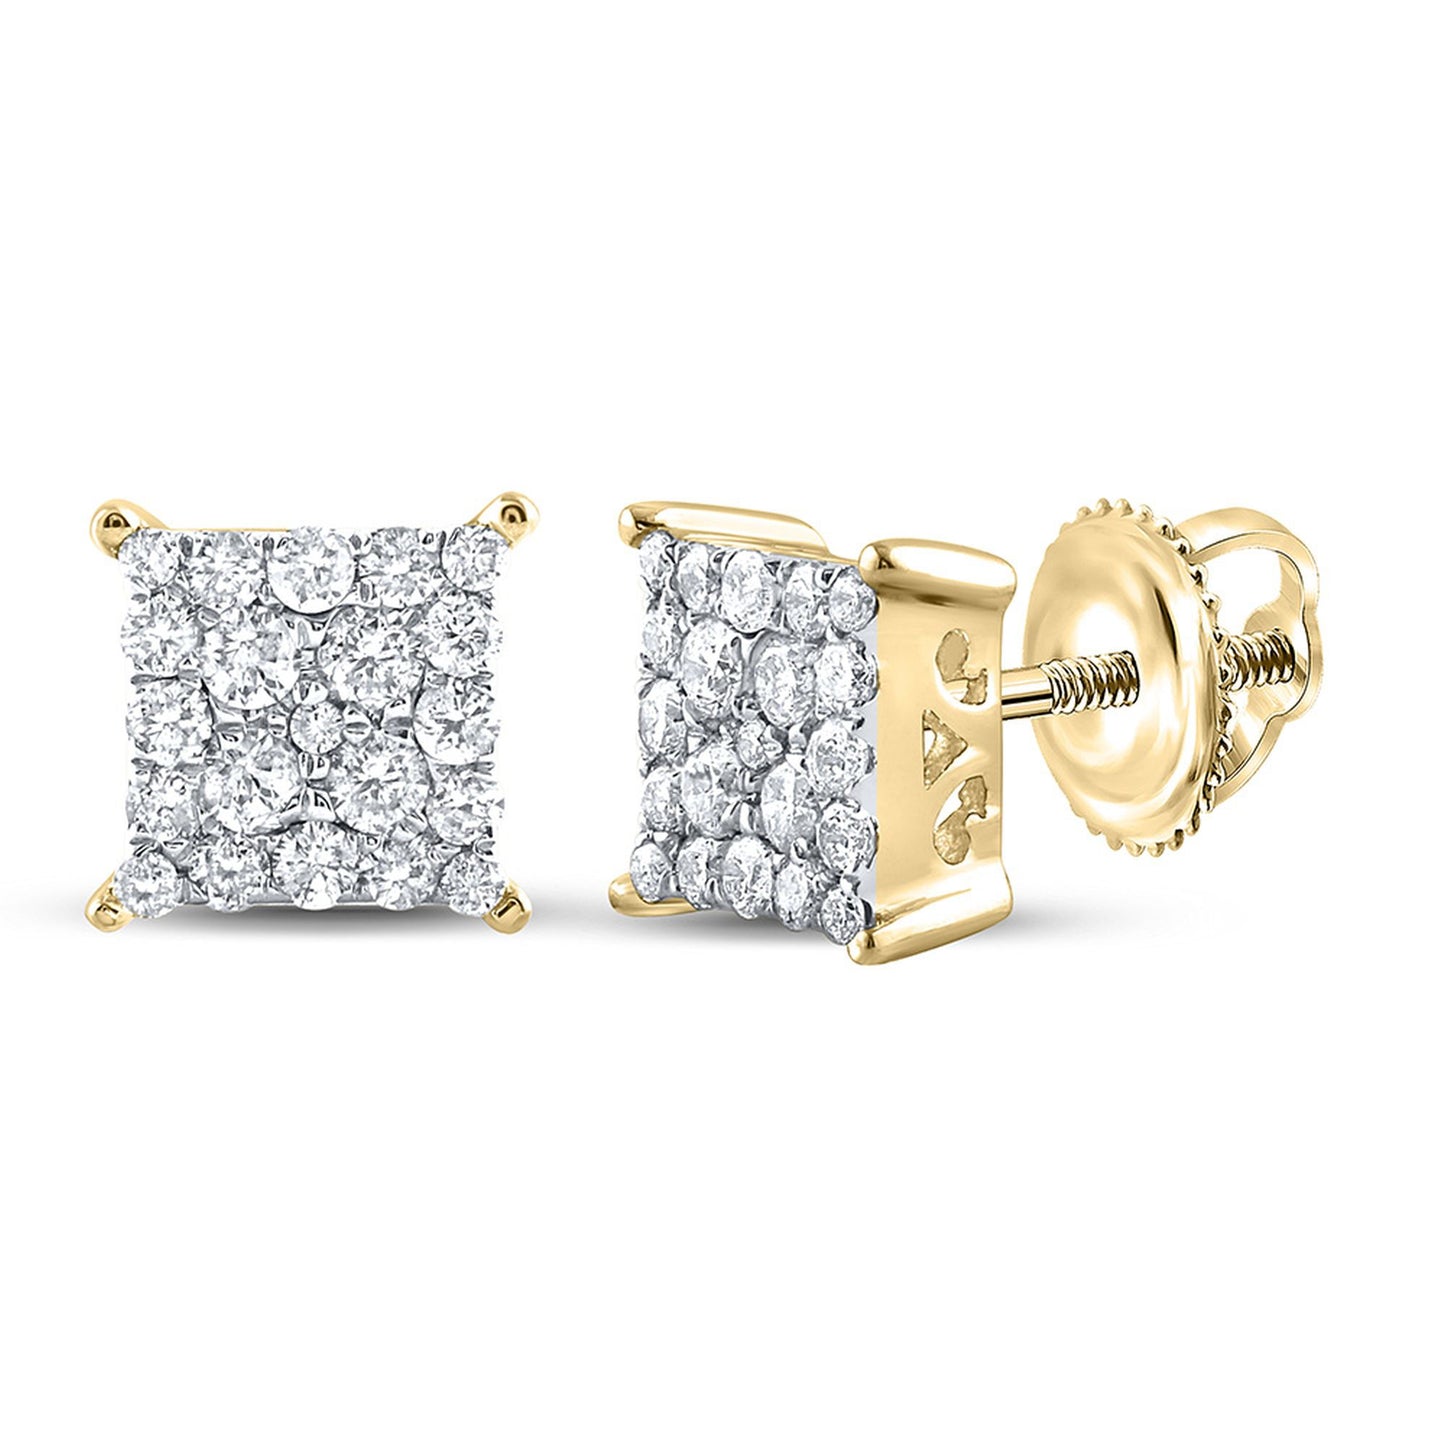 GND 10kt Yellow Gold Womens Round Diamond Square Earrings 1/4 Cttw